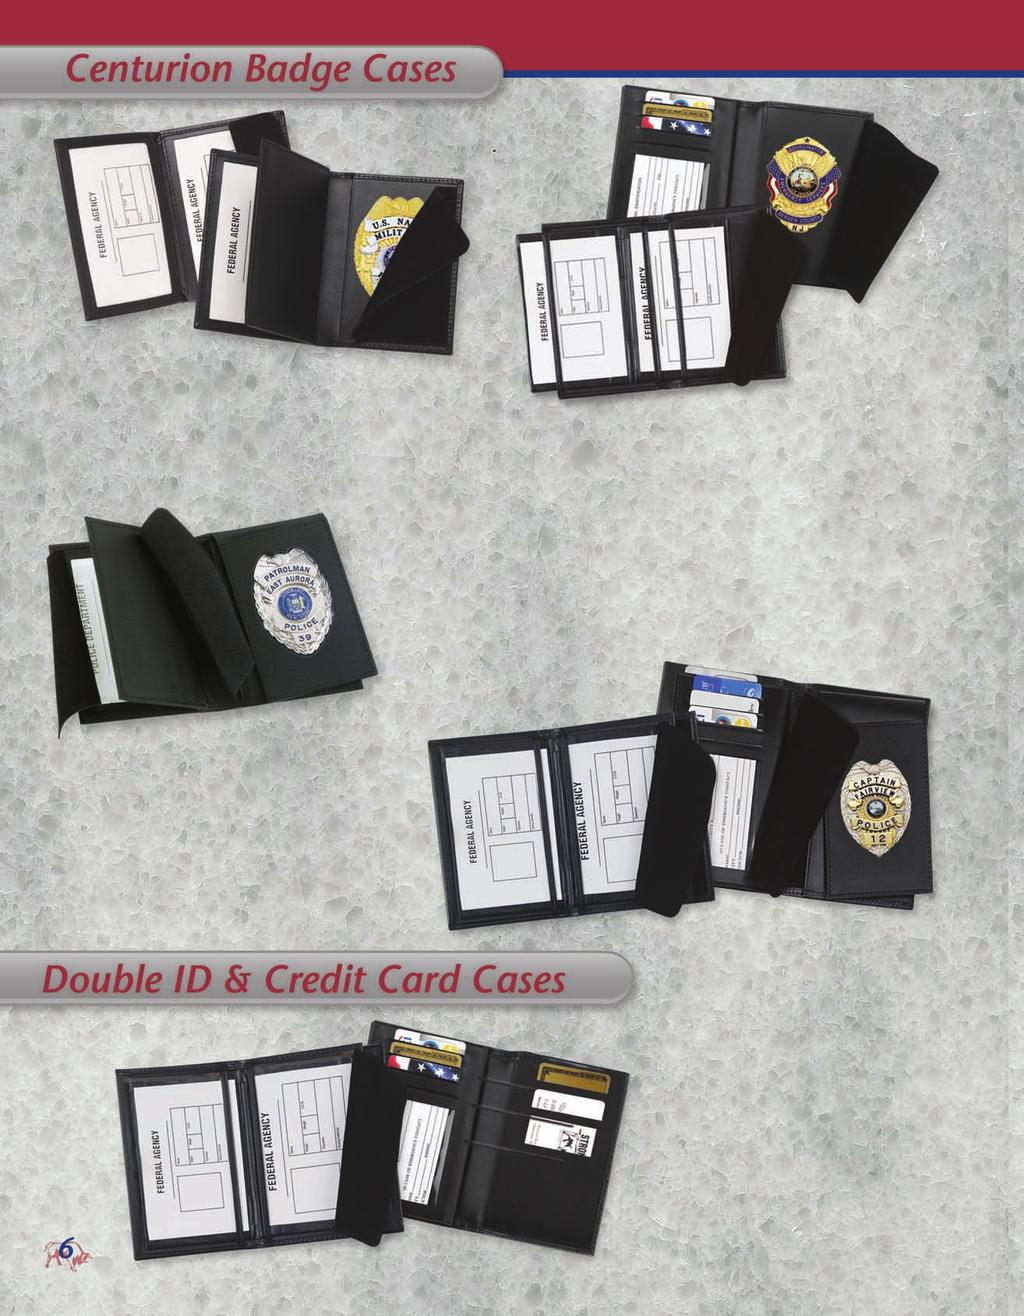 Double ID Badge Case 77800 2 3 / 4 x 4 2 1 / 2 77850 3 x 4 1 / 2 2 3 / 4 77870* 3 x 5 2 3 / 4 *The 77870 is designed with bound windows and for ID's that are on a commision book.